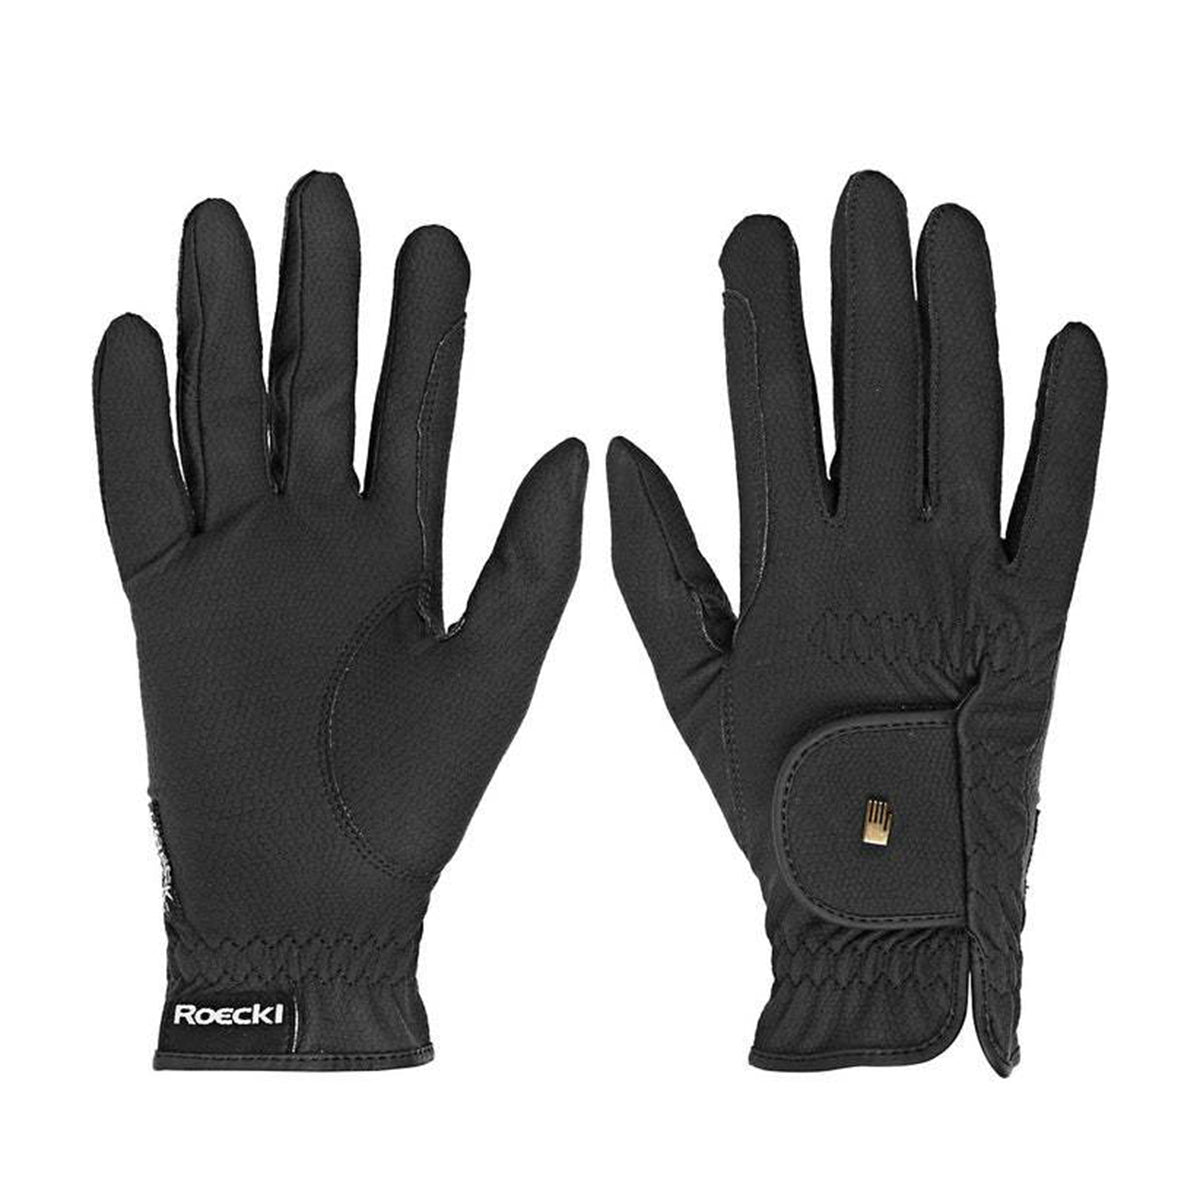 Roeckl-Grip Chester Riding Gloves